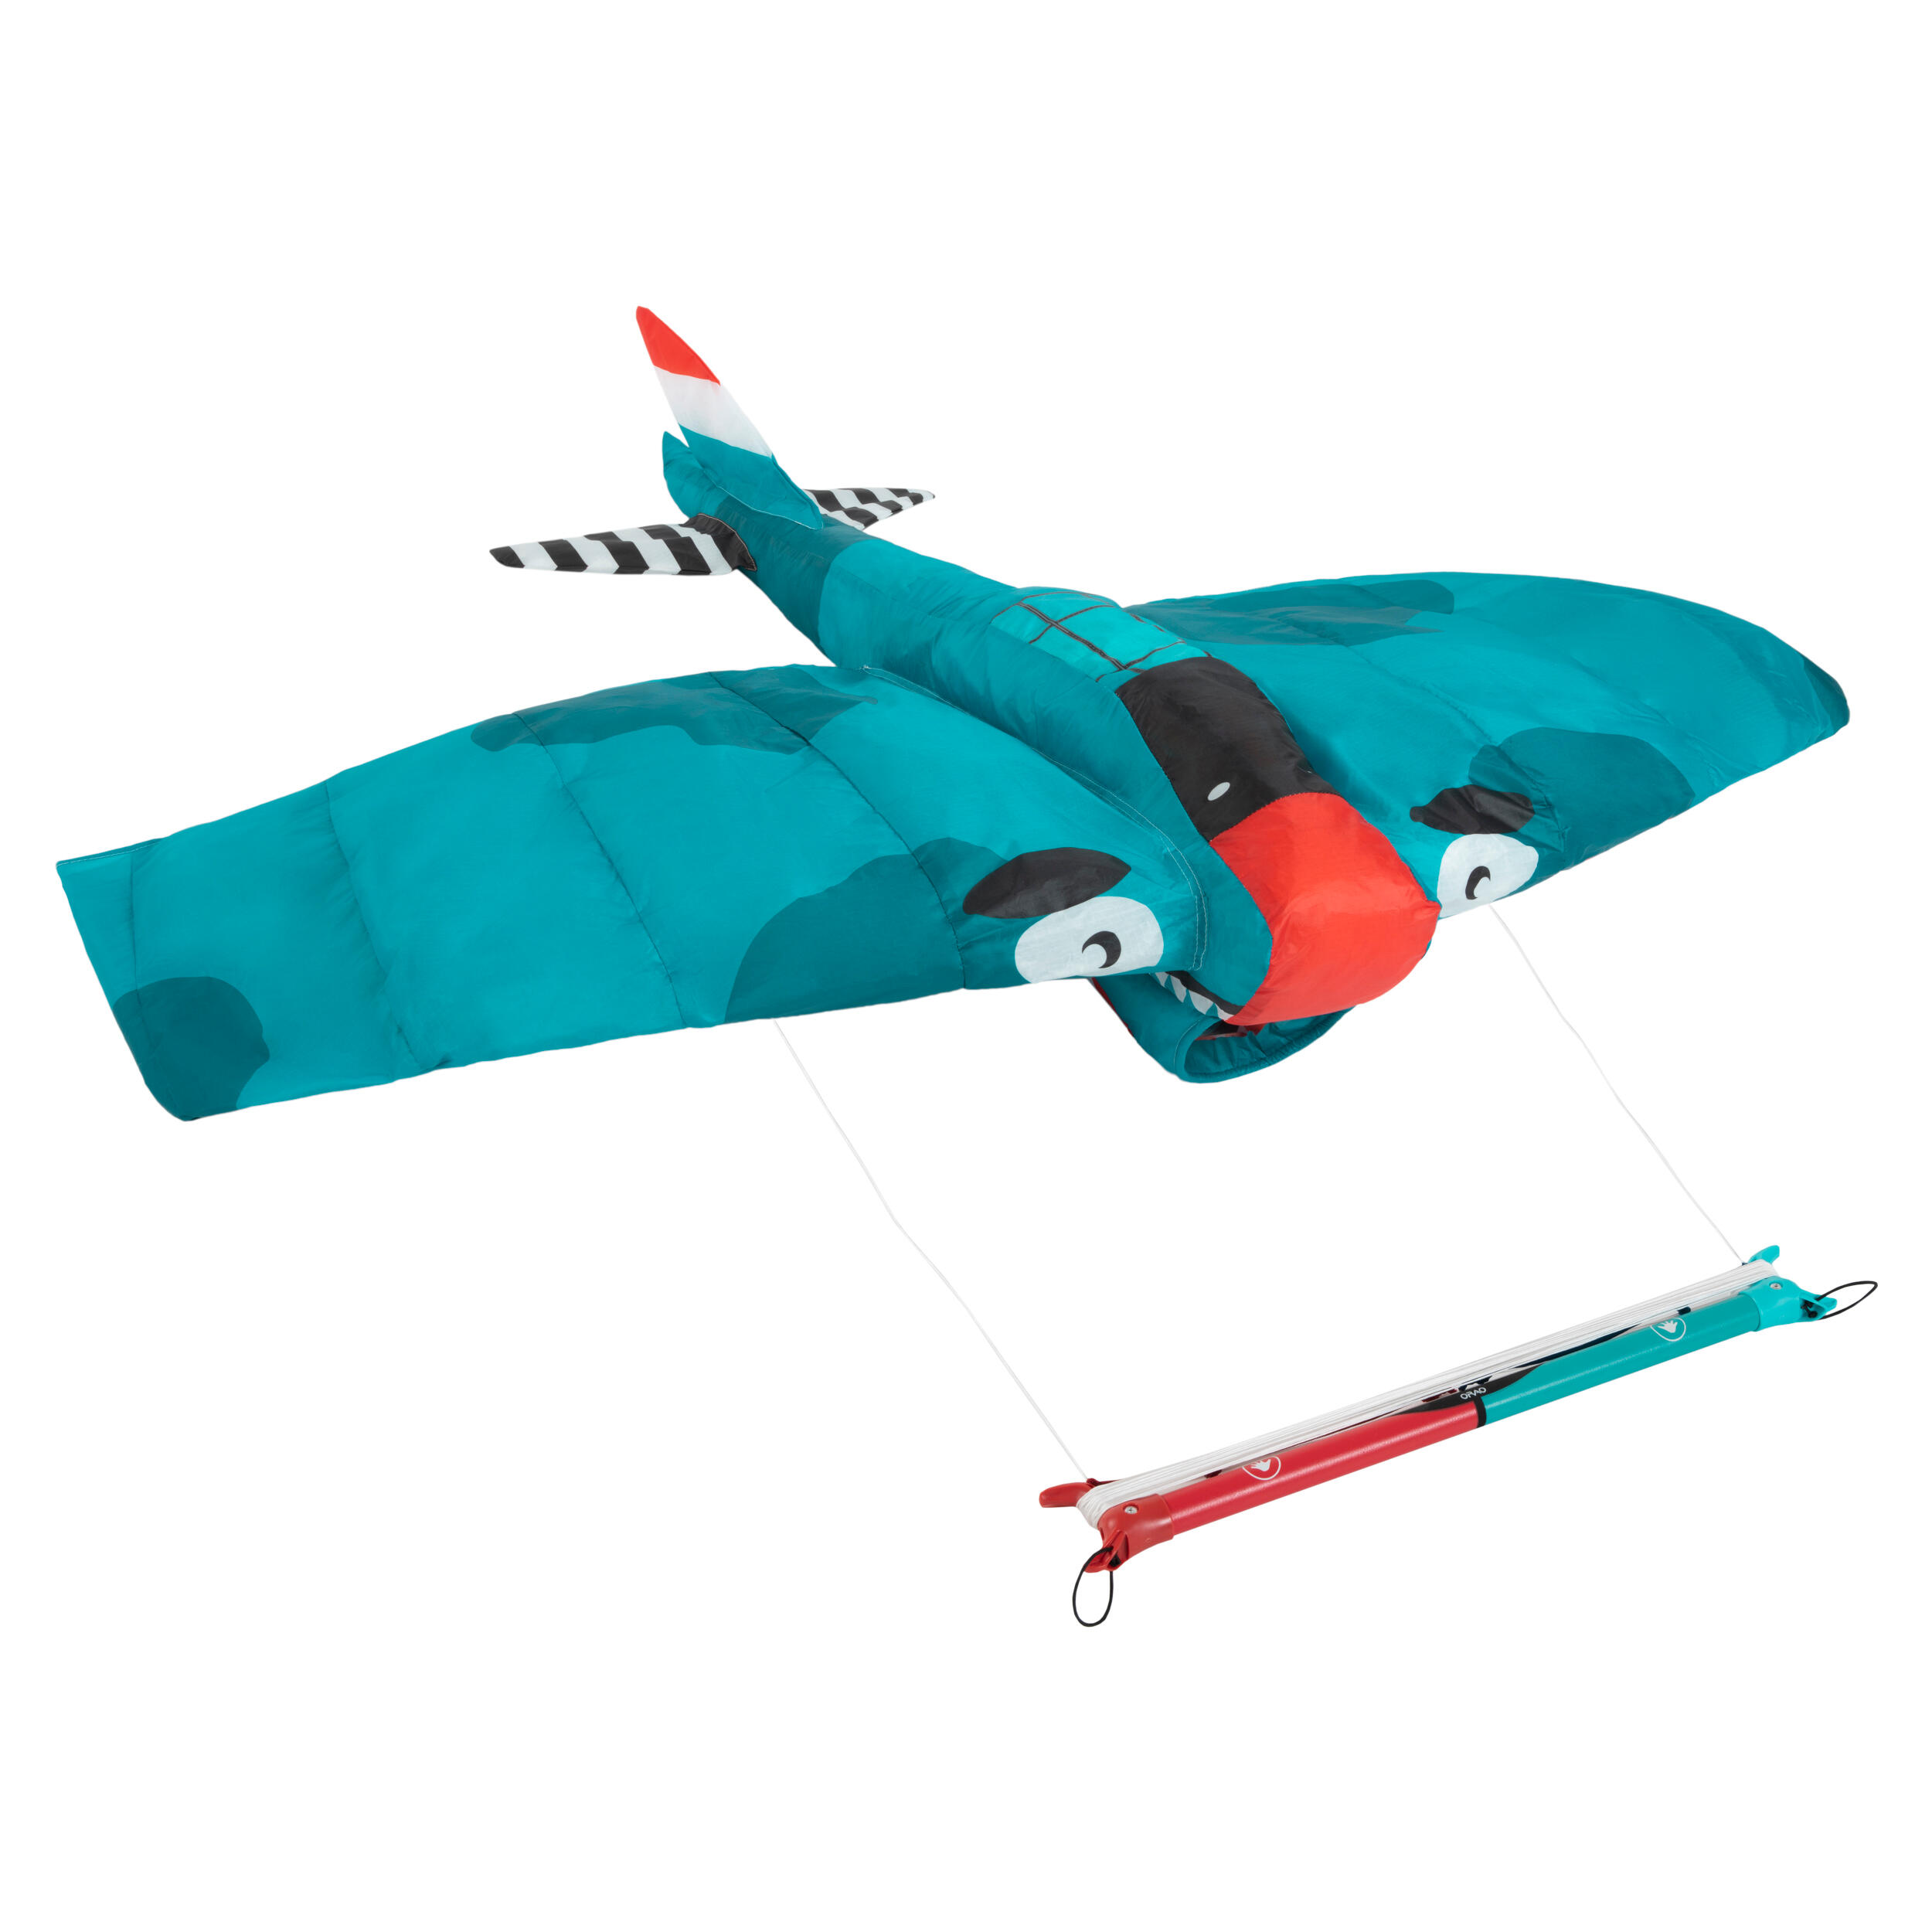 ORAO STUNT KITE "3D PLANE 180" for kids - with bar